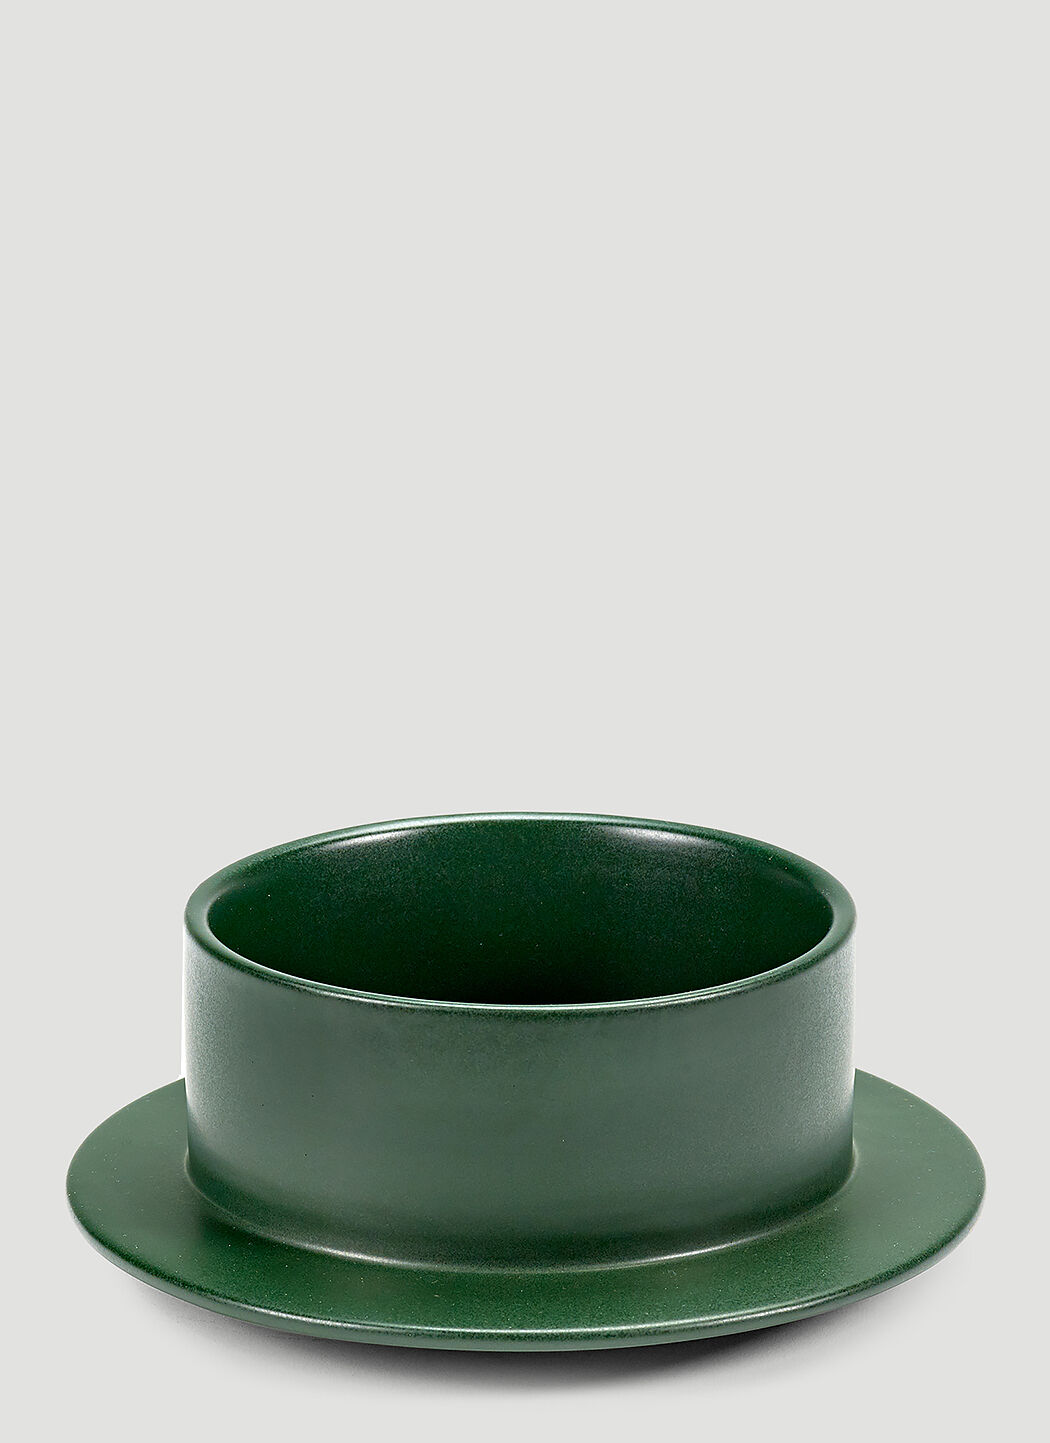 Valerie_objects Dishes to Dishes Medium Bowl Green wps0642284